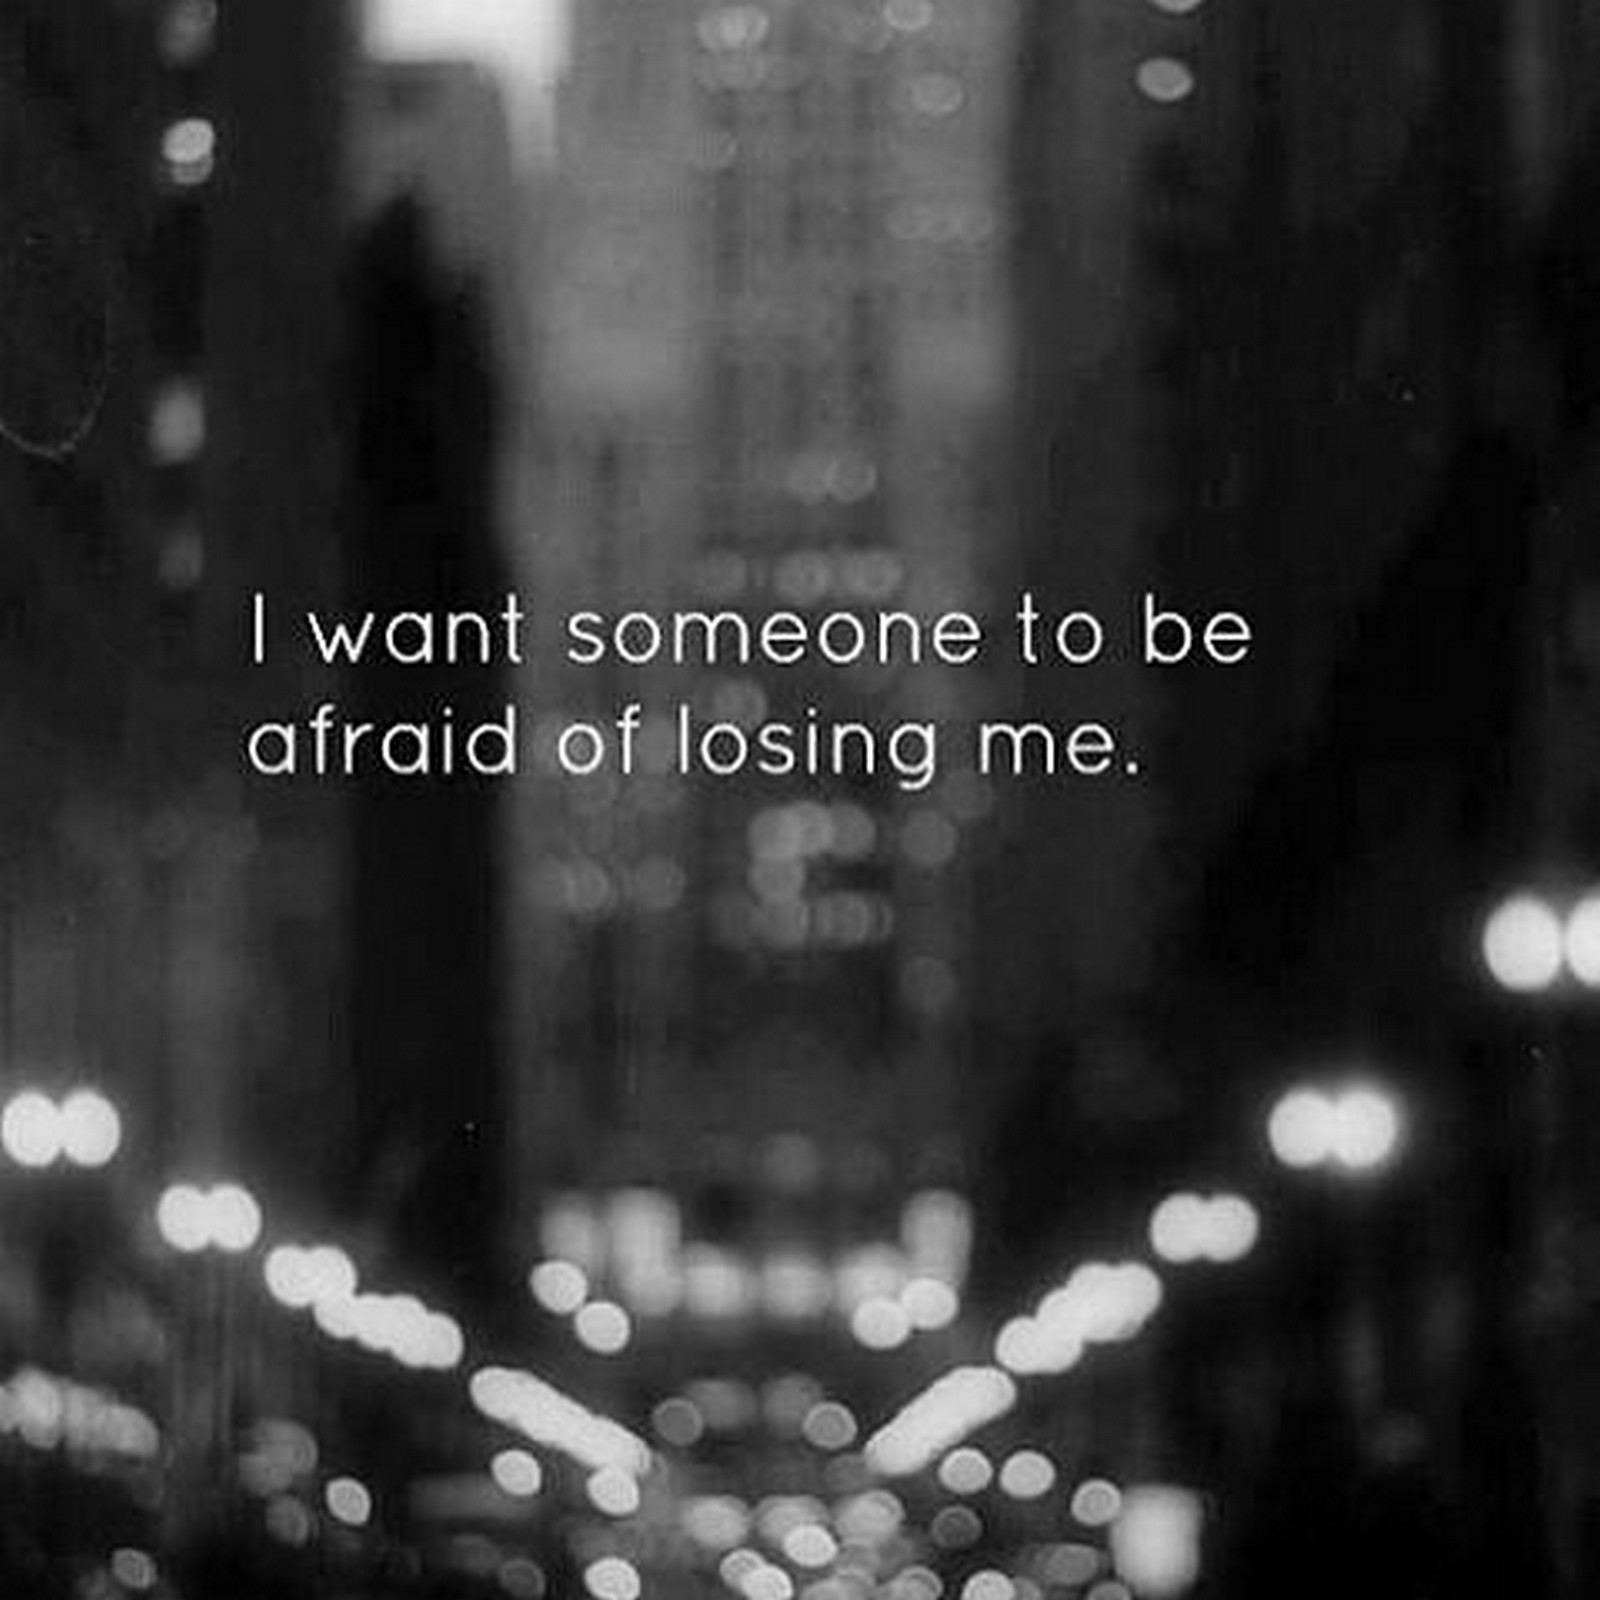 55 Romantic Quotes - "I want someone to be afraid of losing me."